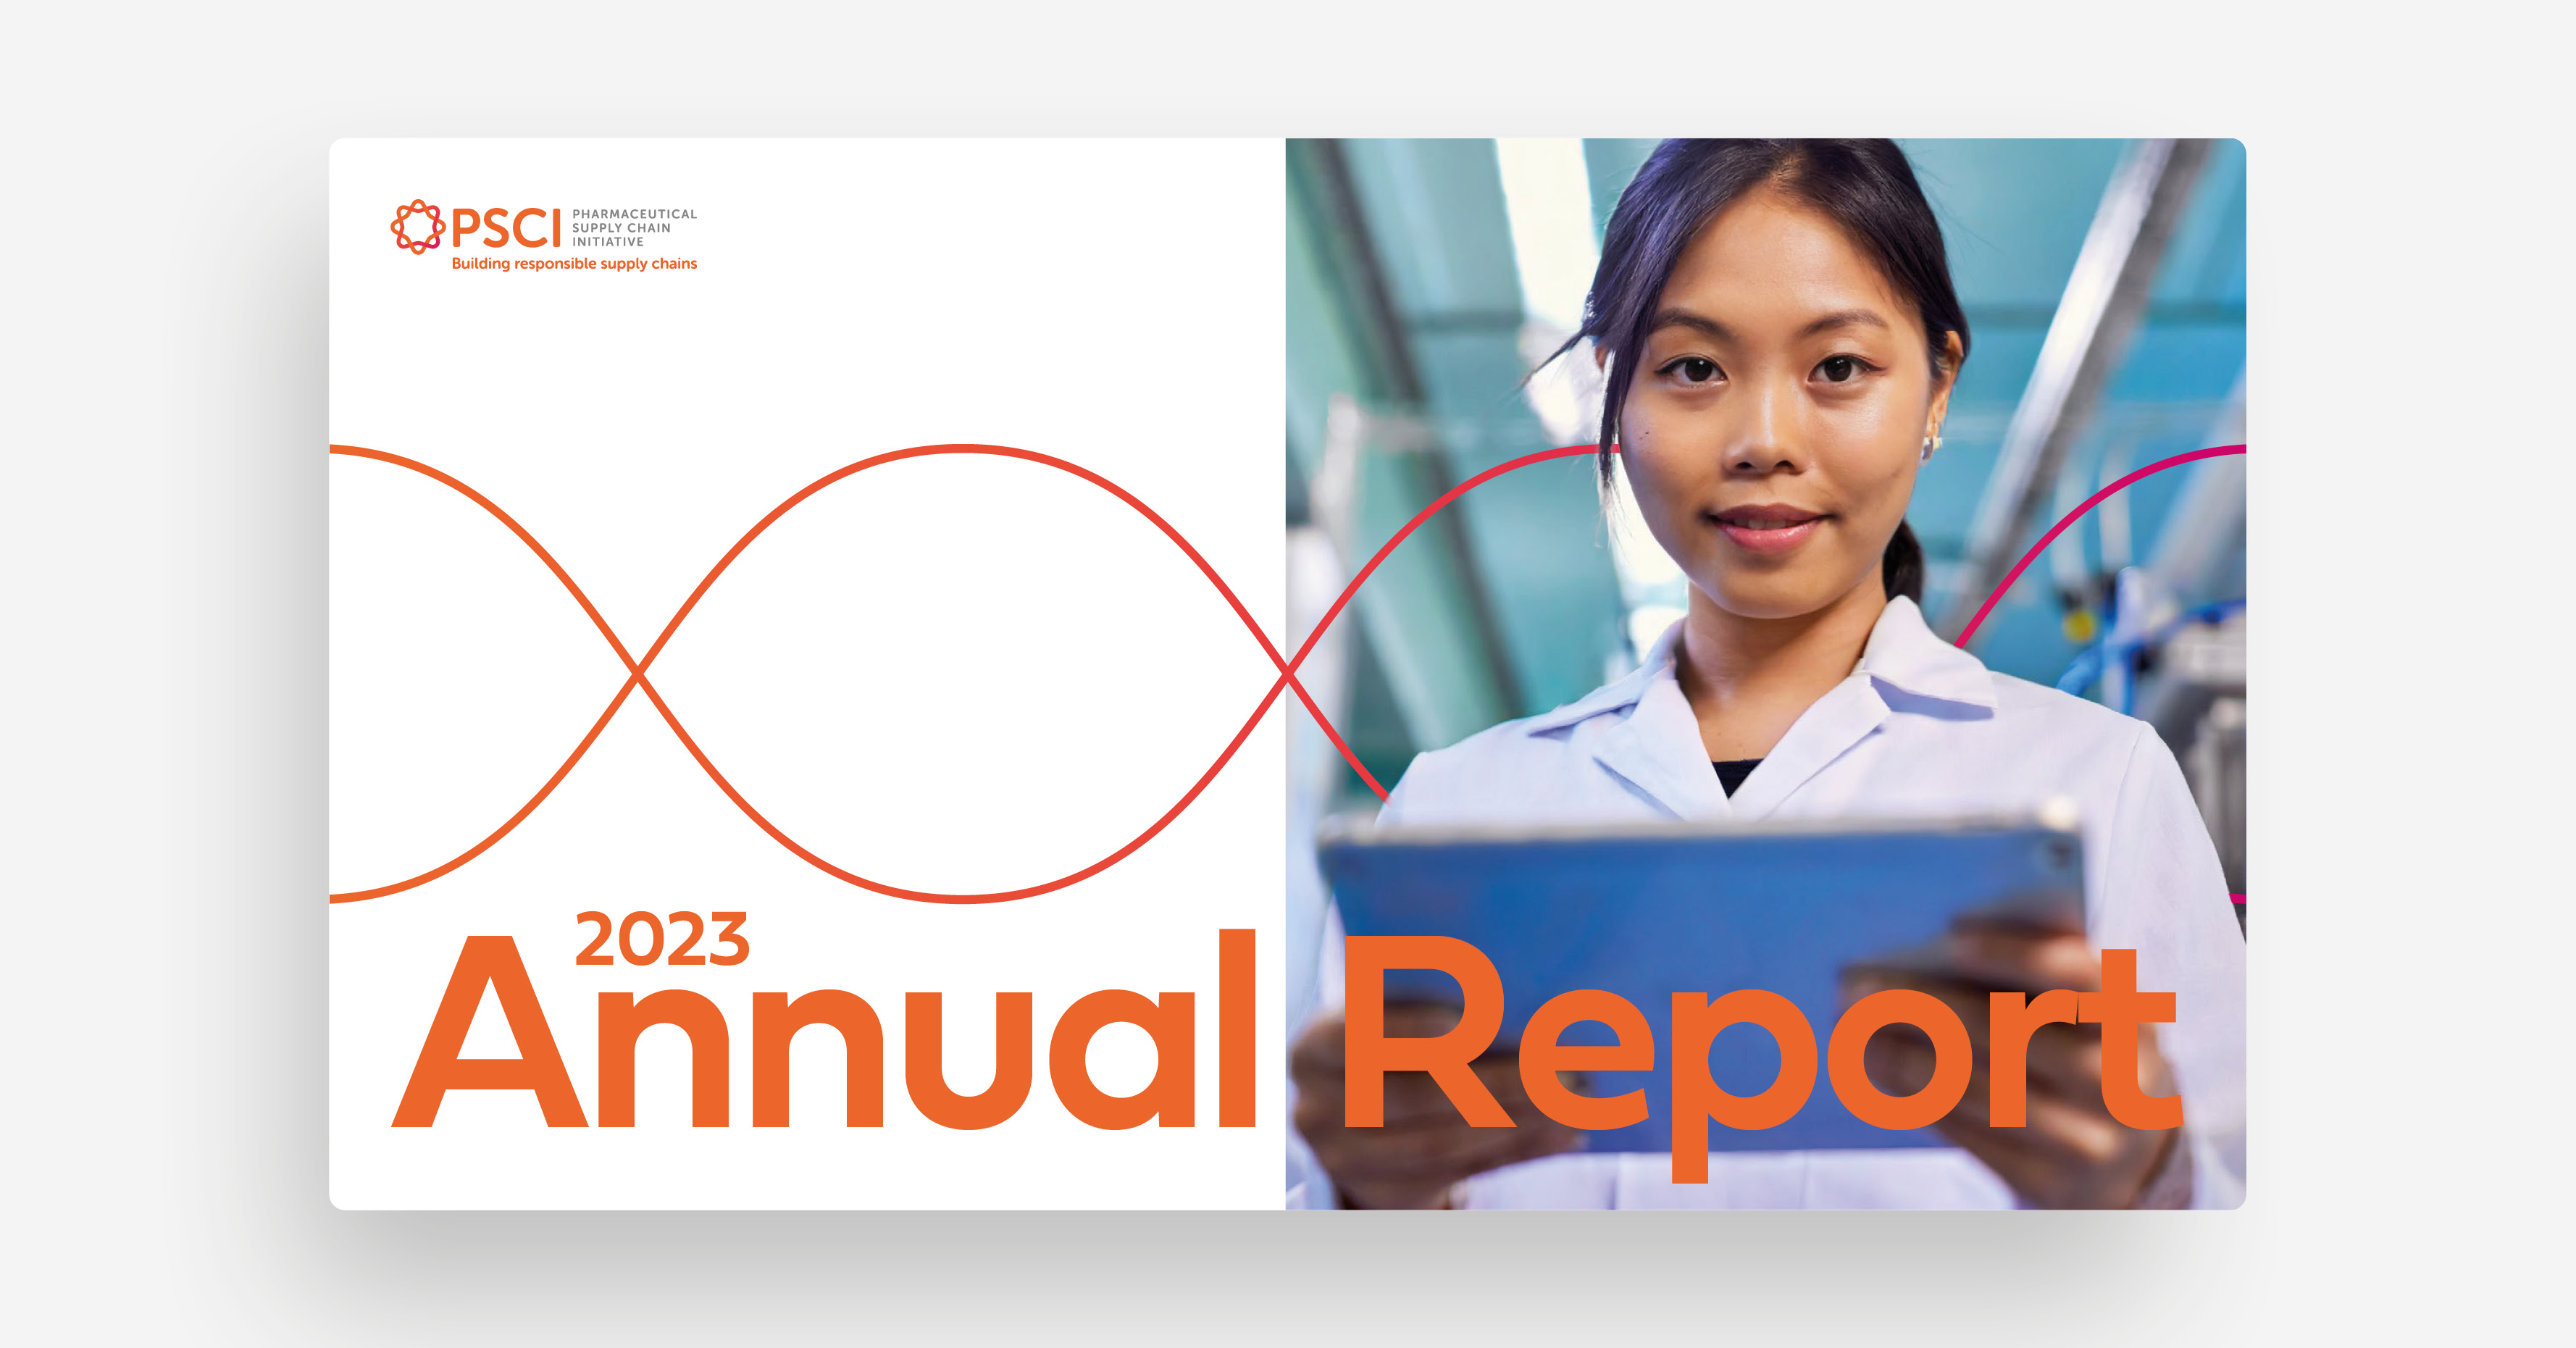 The PSCI publishes progress towards sustainable supply chains in its 2023 Annual Report